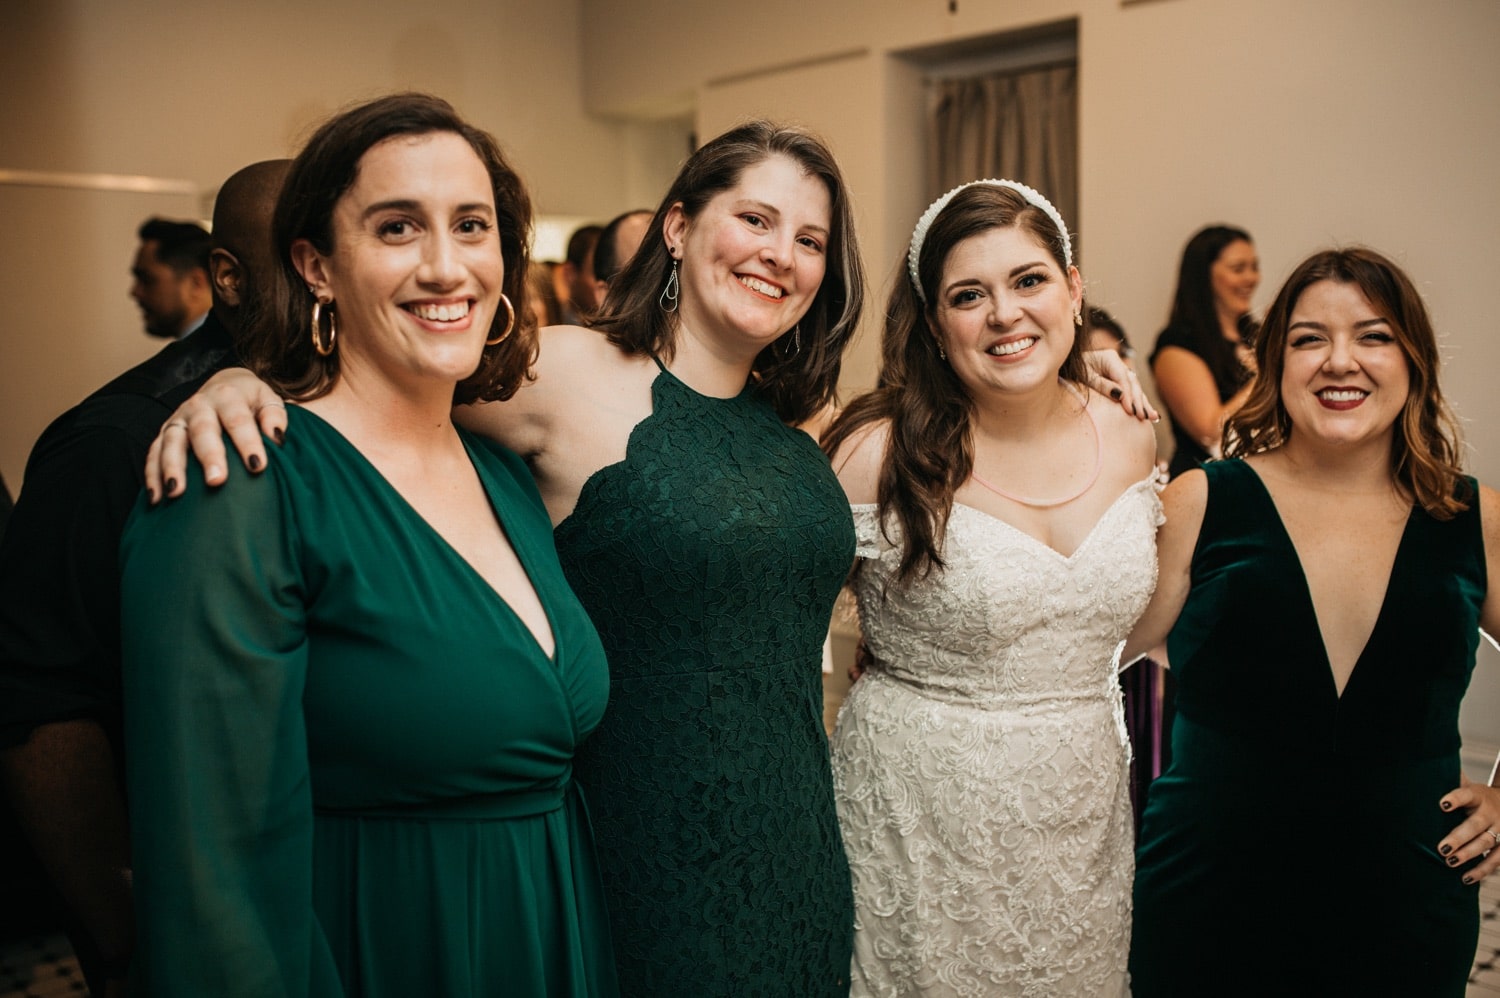 bride-standing-with-wedding-guests